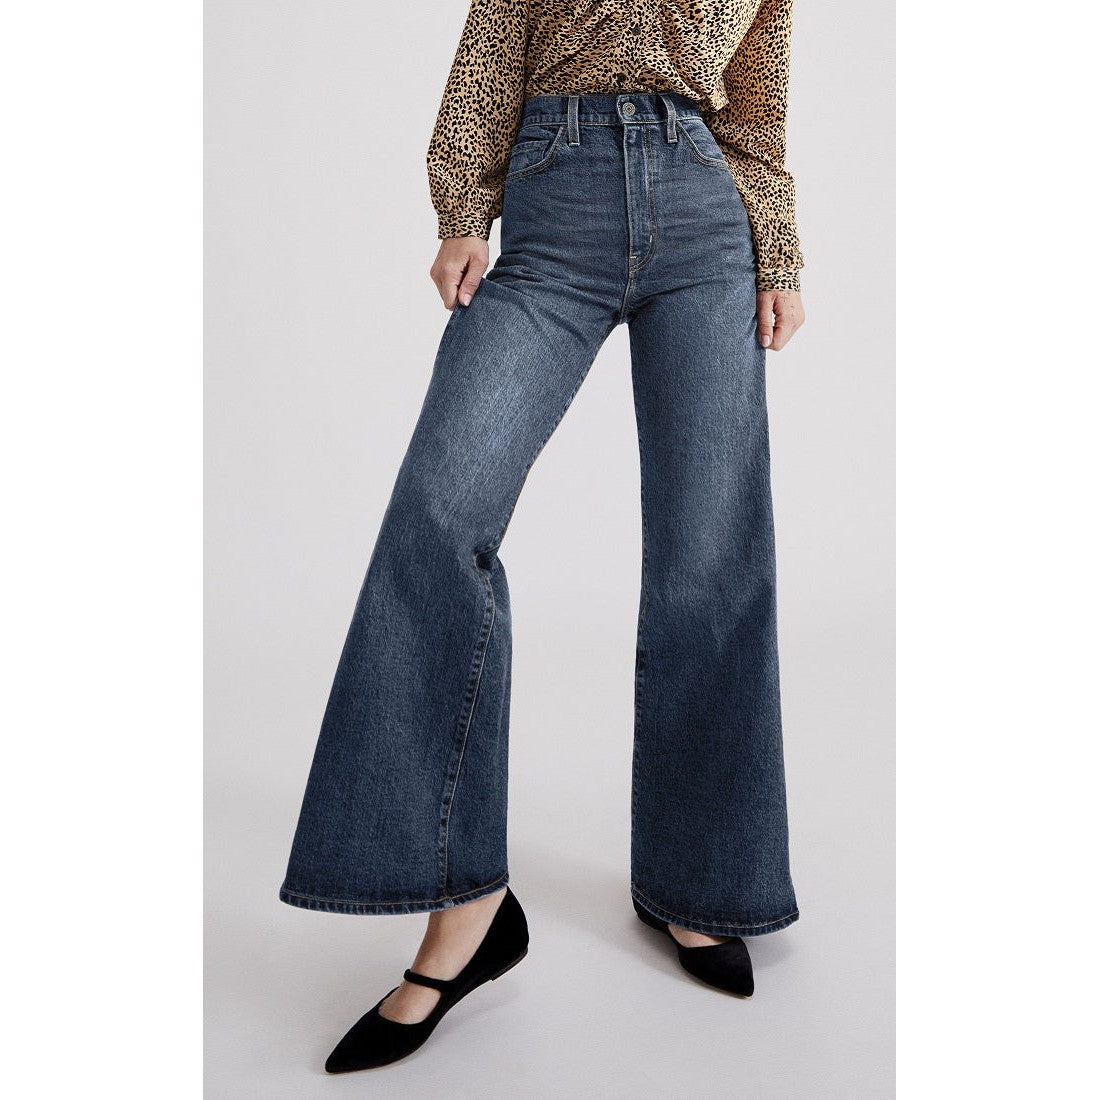 Ribcage Straight Ankle Jean in Summer Slide